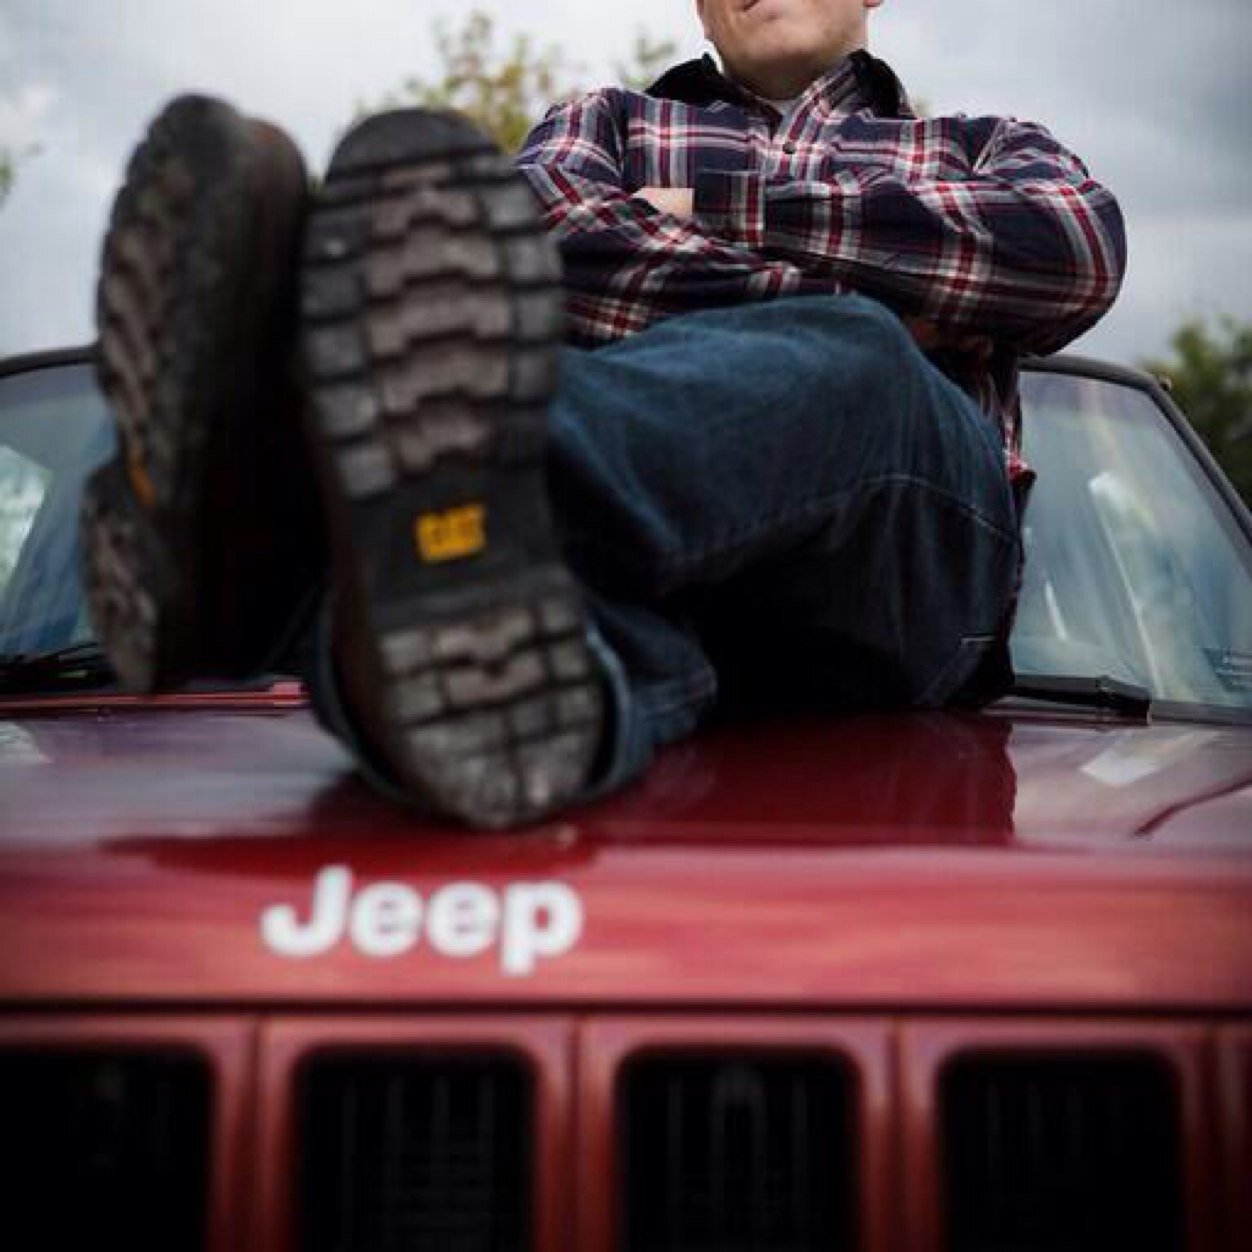 Jeeper and dipper. Just empty every pocket. University of Northwestern Ohio student. Michigan/Ohio